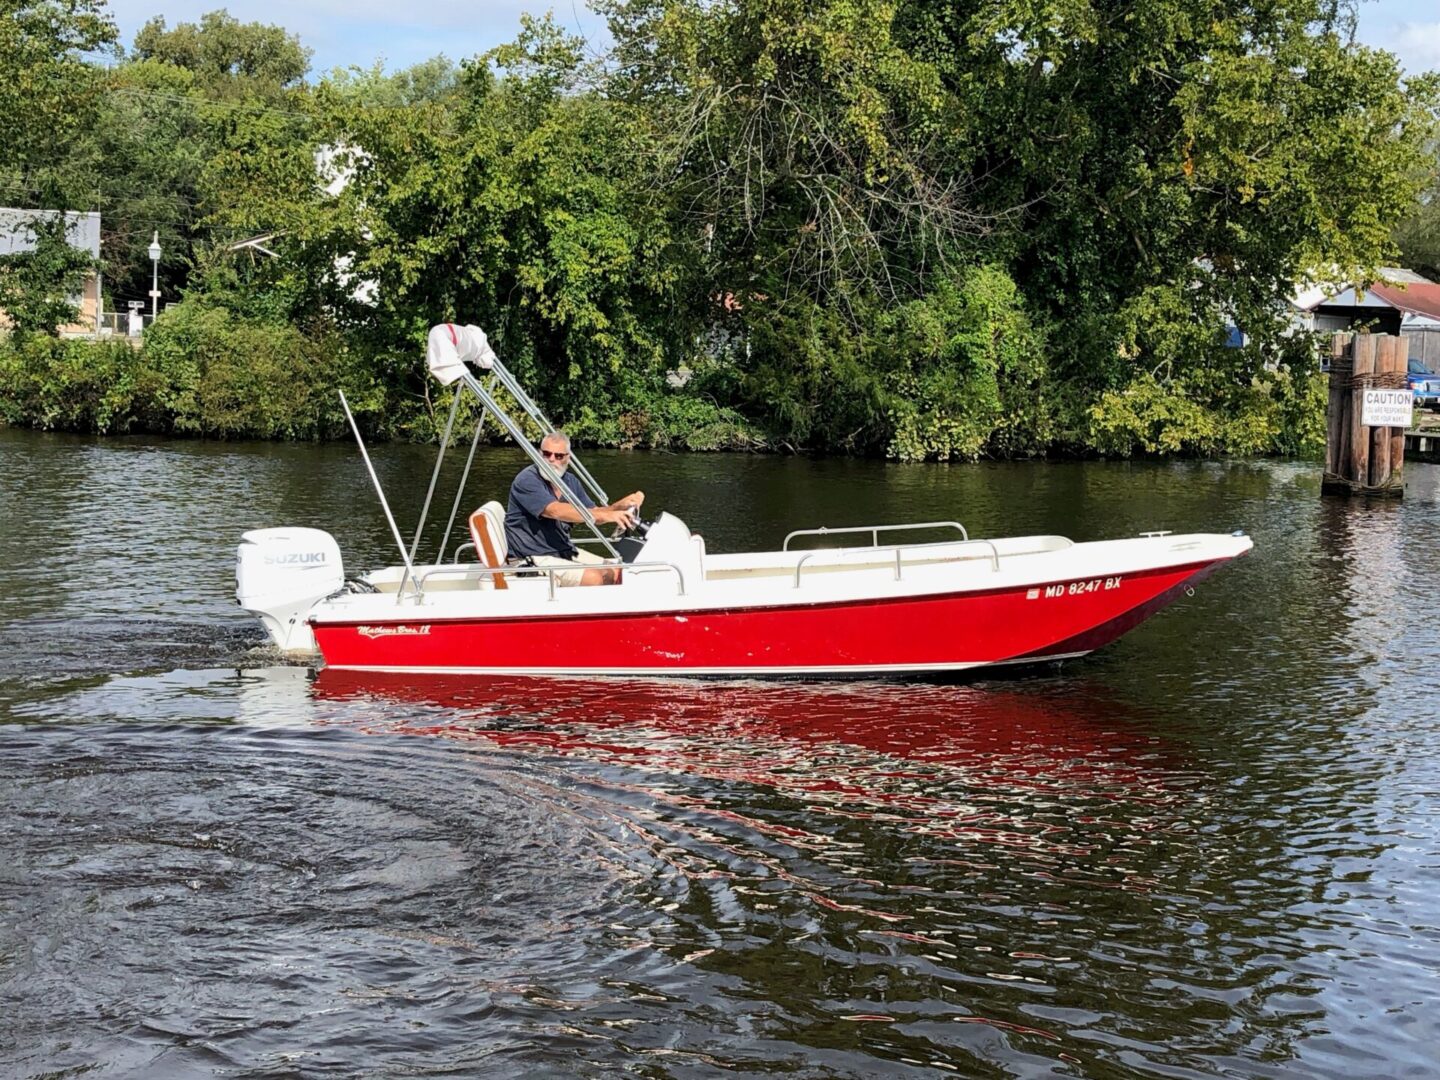 A person driving a motor boat